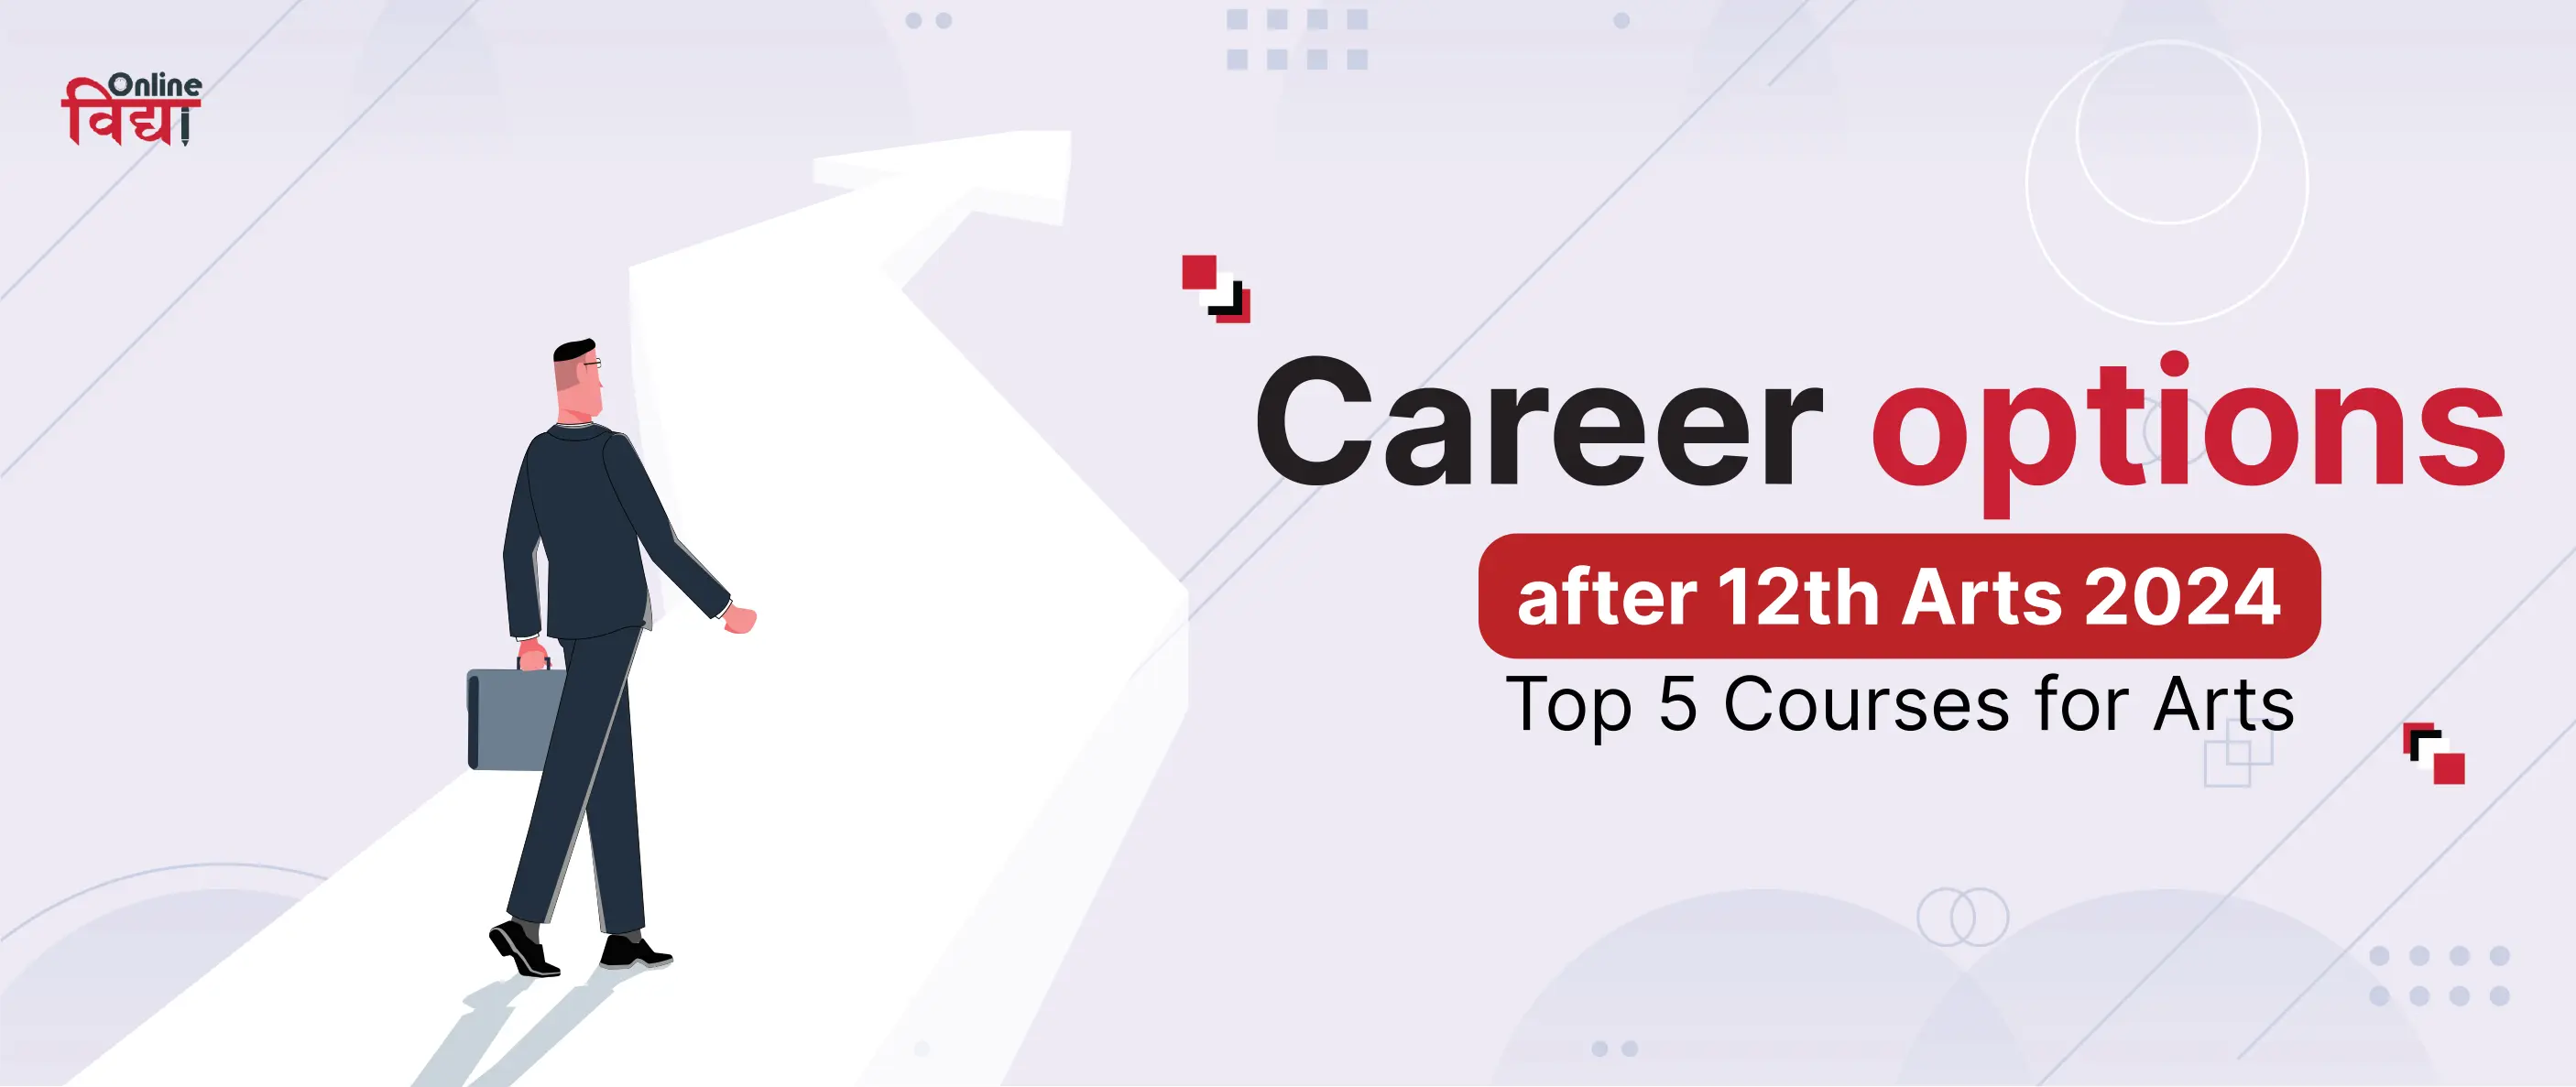 Career options after 12th Arts 2024- Top 5 Courses for Arts